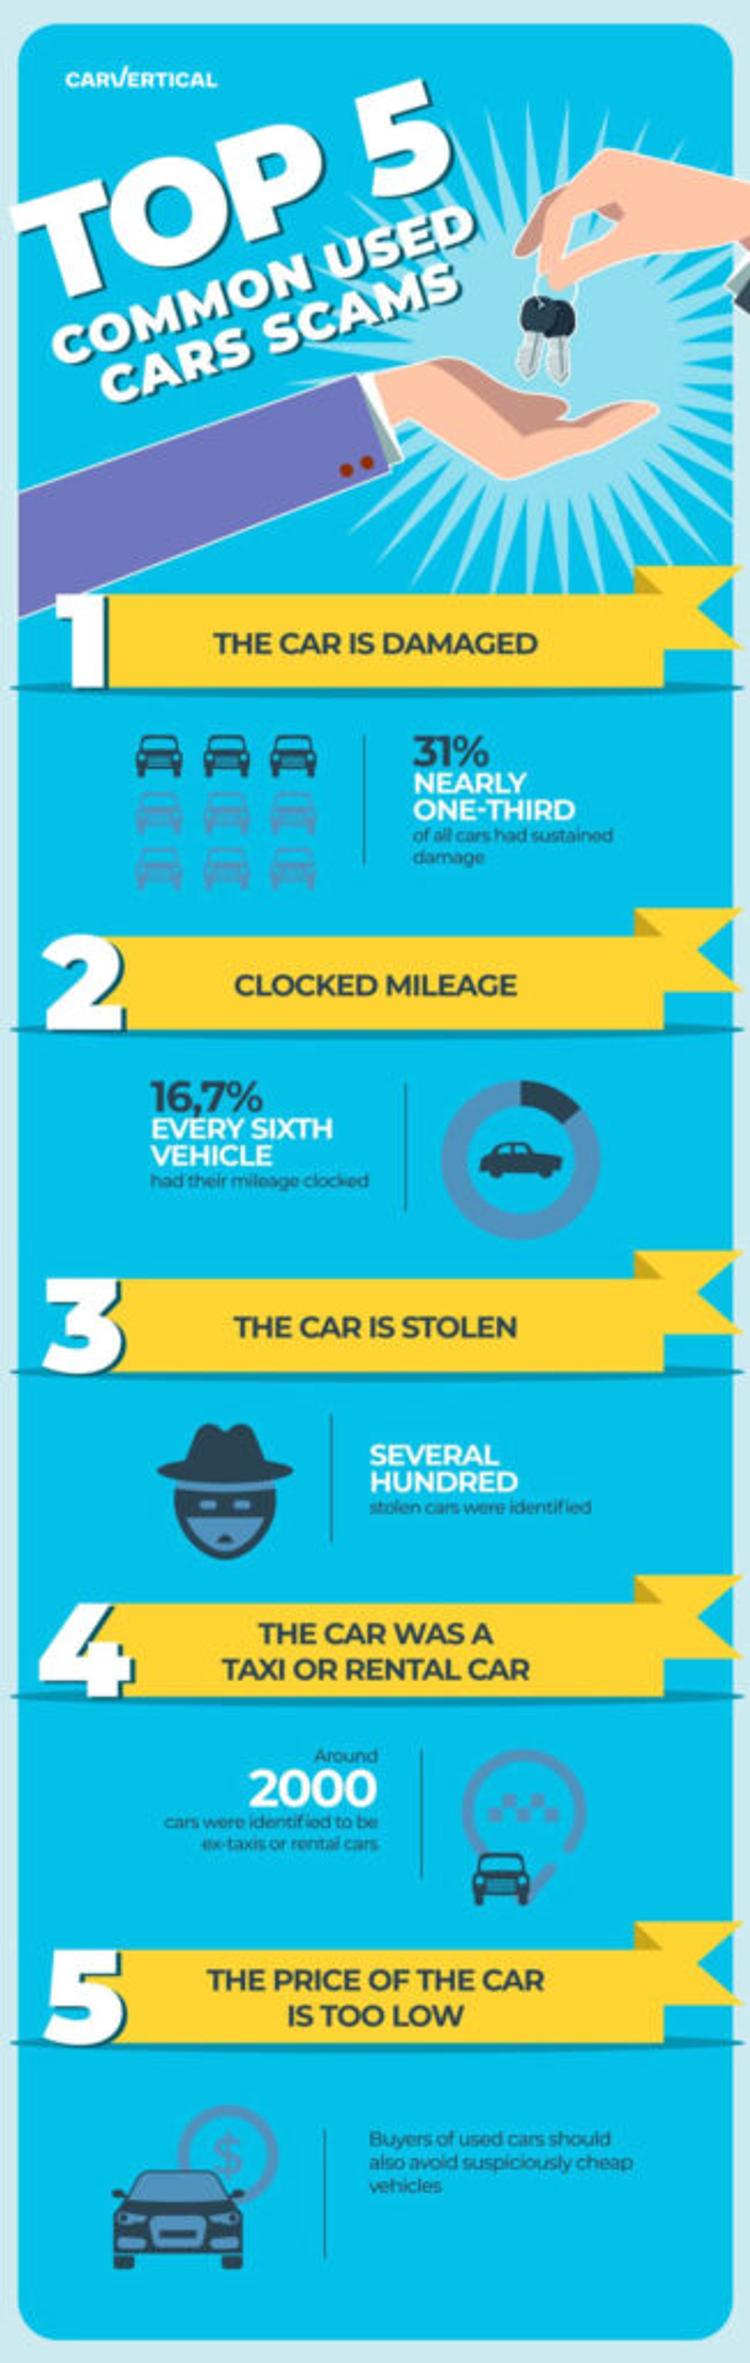 TOP 5 scams to avoid when buying a used car according to